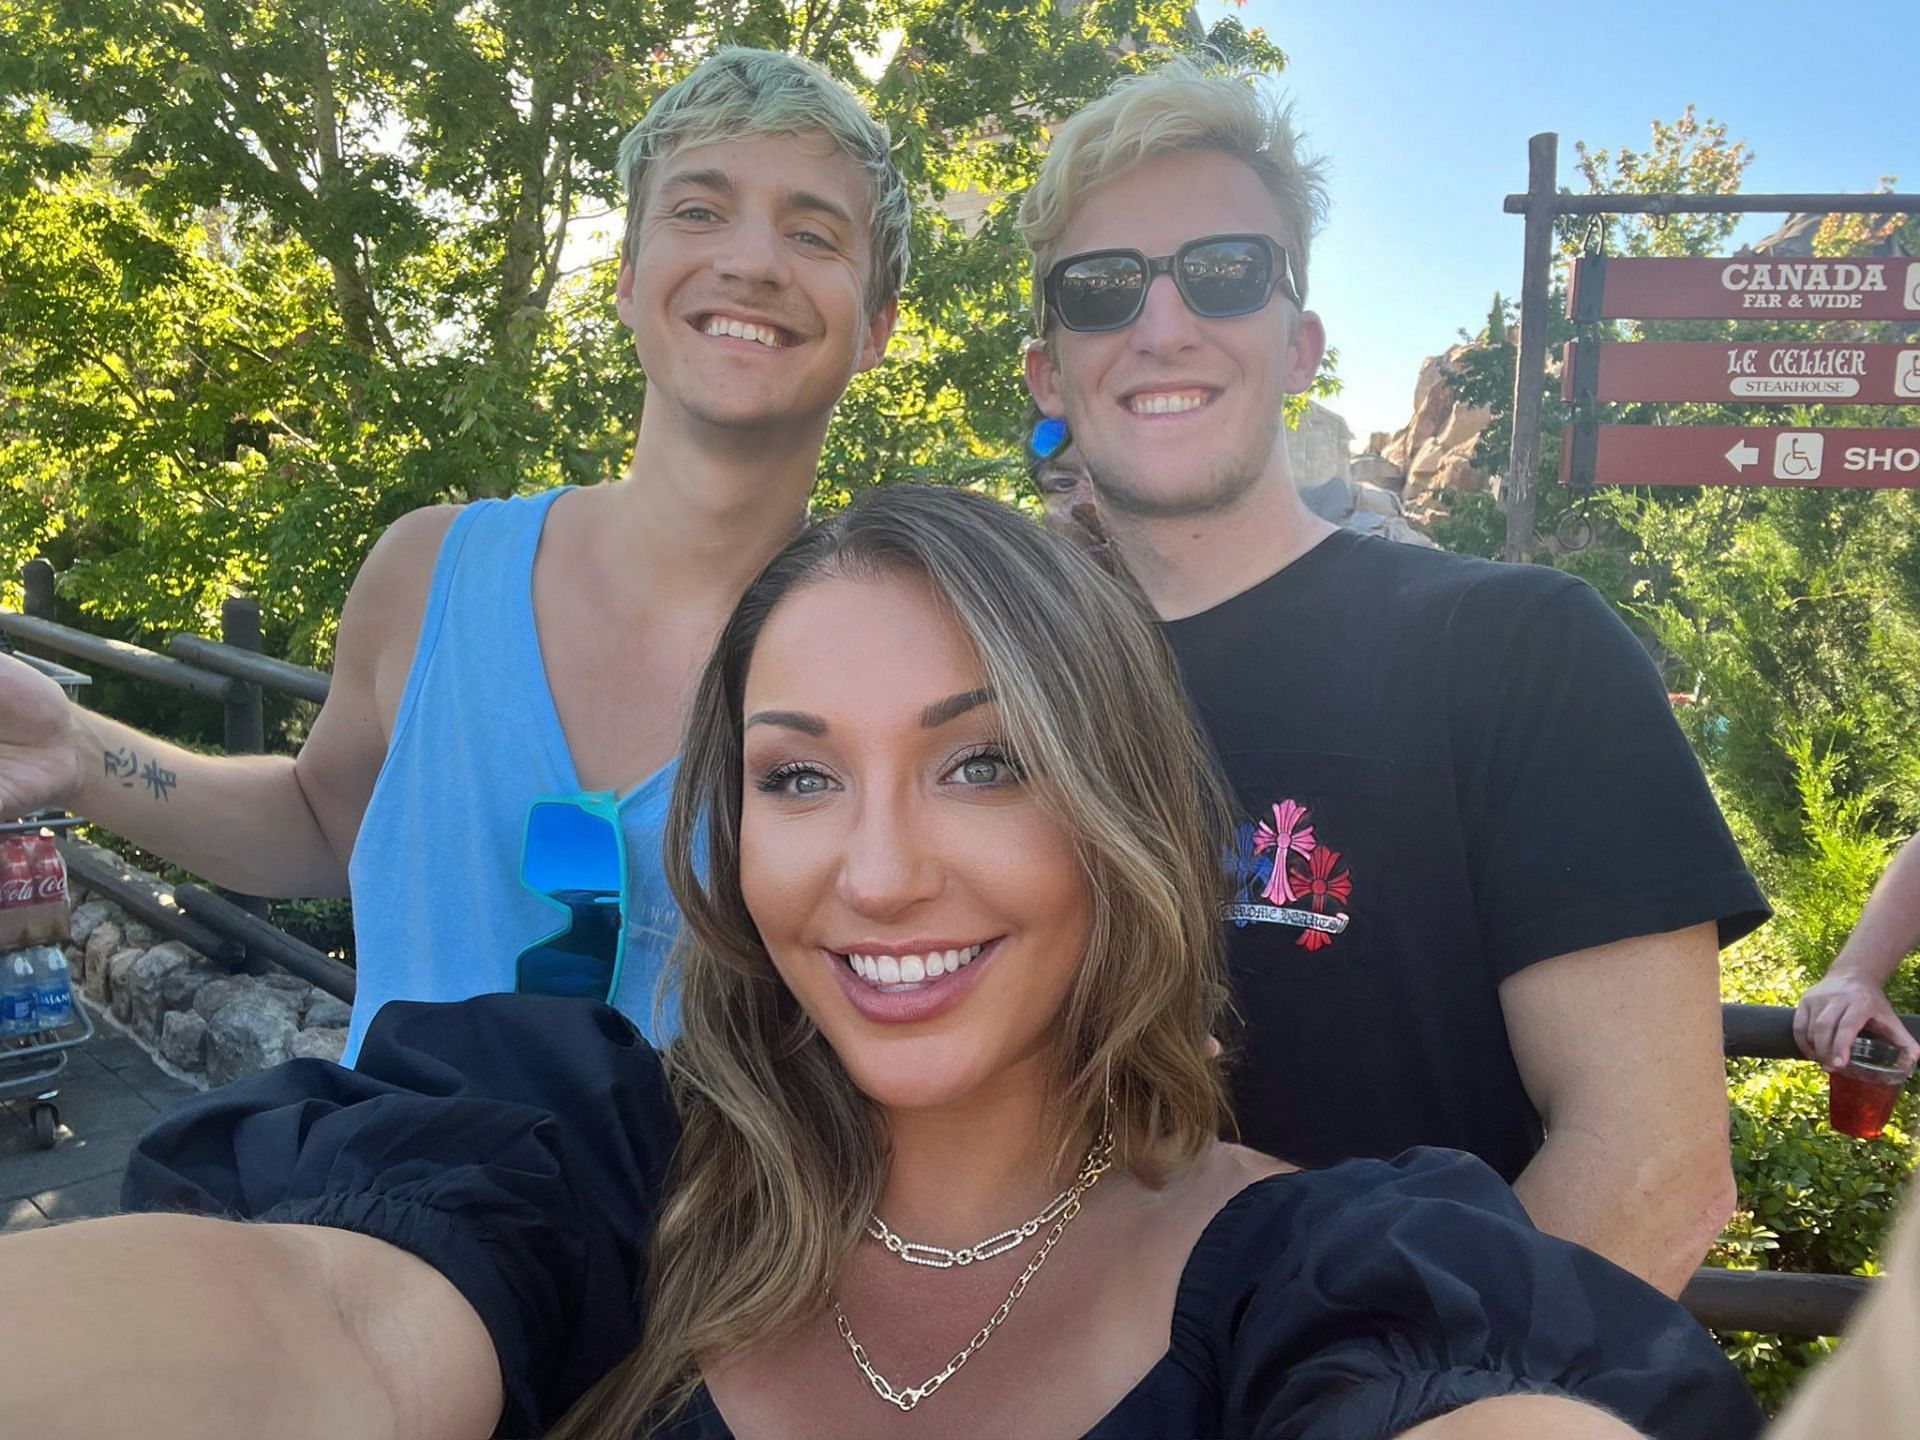 Ninja (left), his wife Jessica Blevins (center), and Tfue (right) were not always on such friendly terms (Image via Twitter/JessicaBlevins)